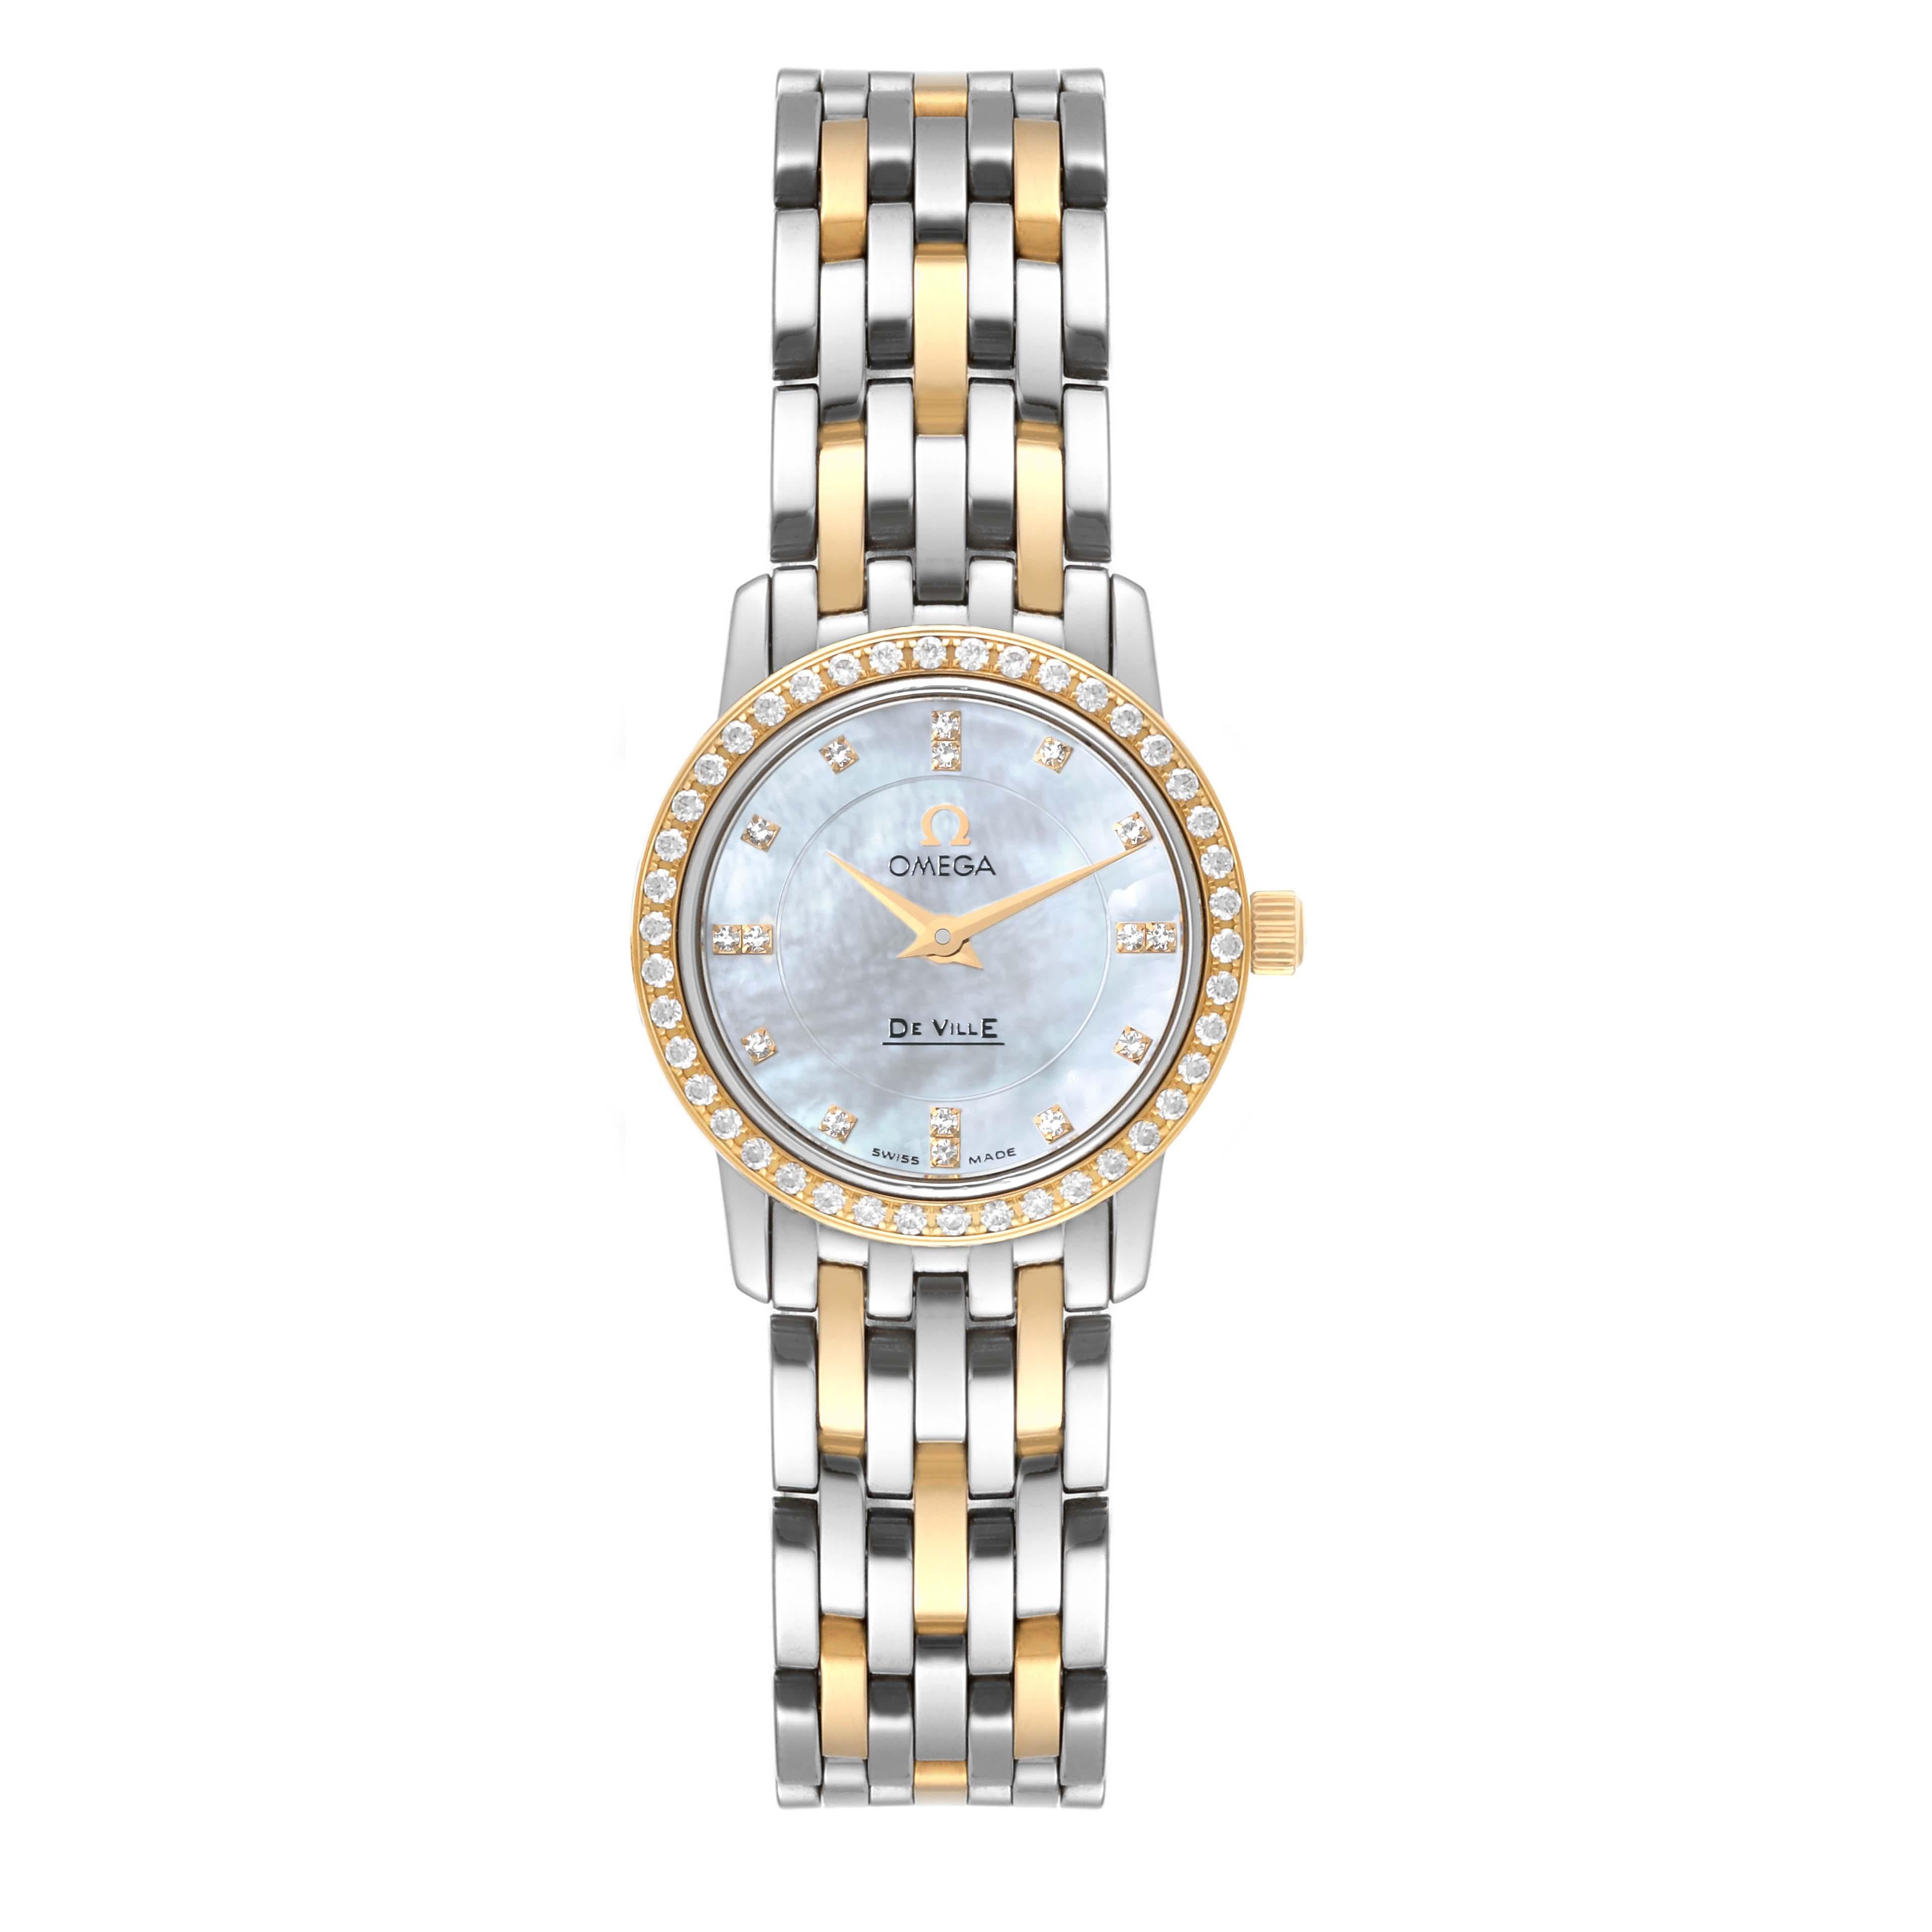 Omega DeVille MOP Diamond Steel Yellow Gold Ladies Watch 4375.75.00 Card. Quartz movement. Stainless steel and 18K yellow gold round case 22 mm in diameter. Original Omega factory yellow gold diamond bezel. Domed scratch-resistant sapphire crystal